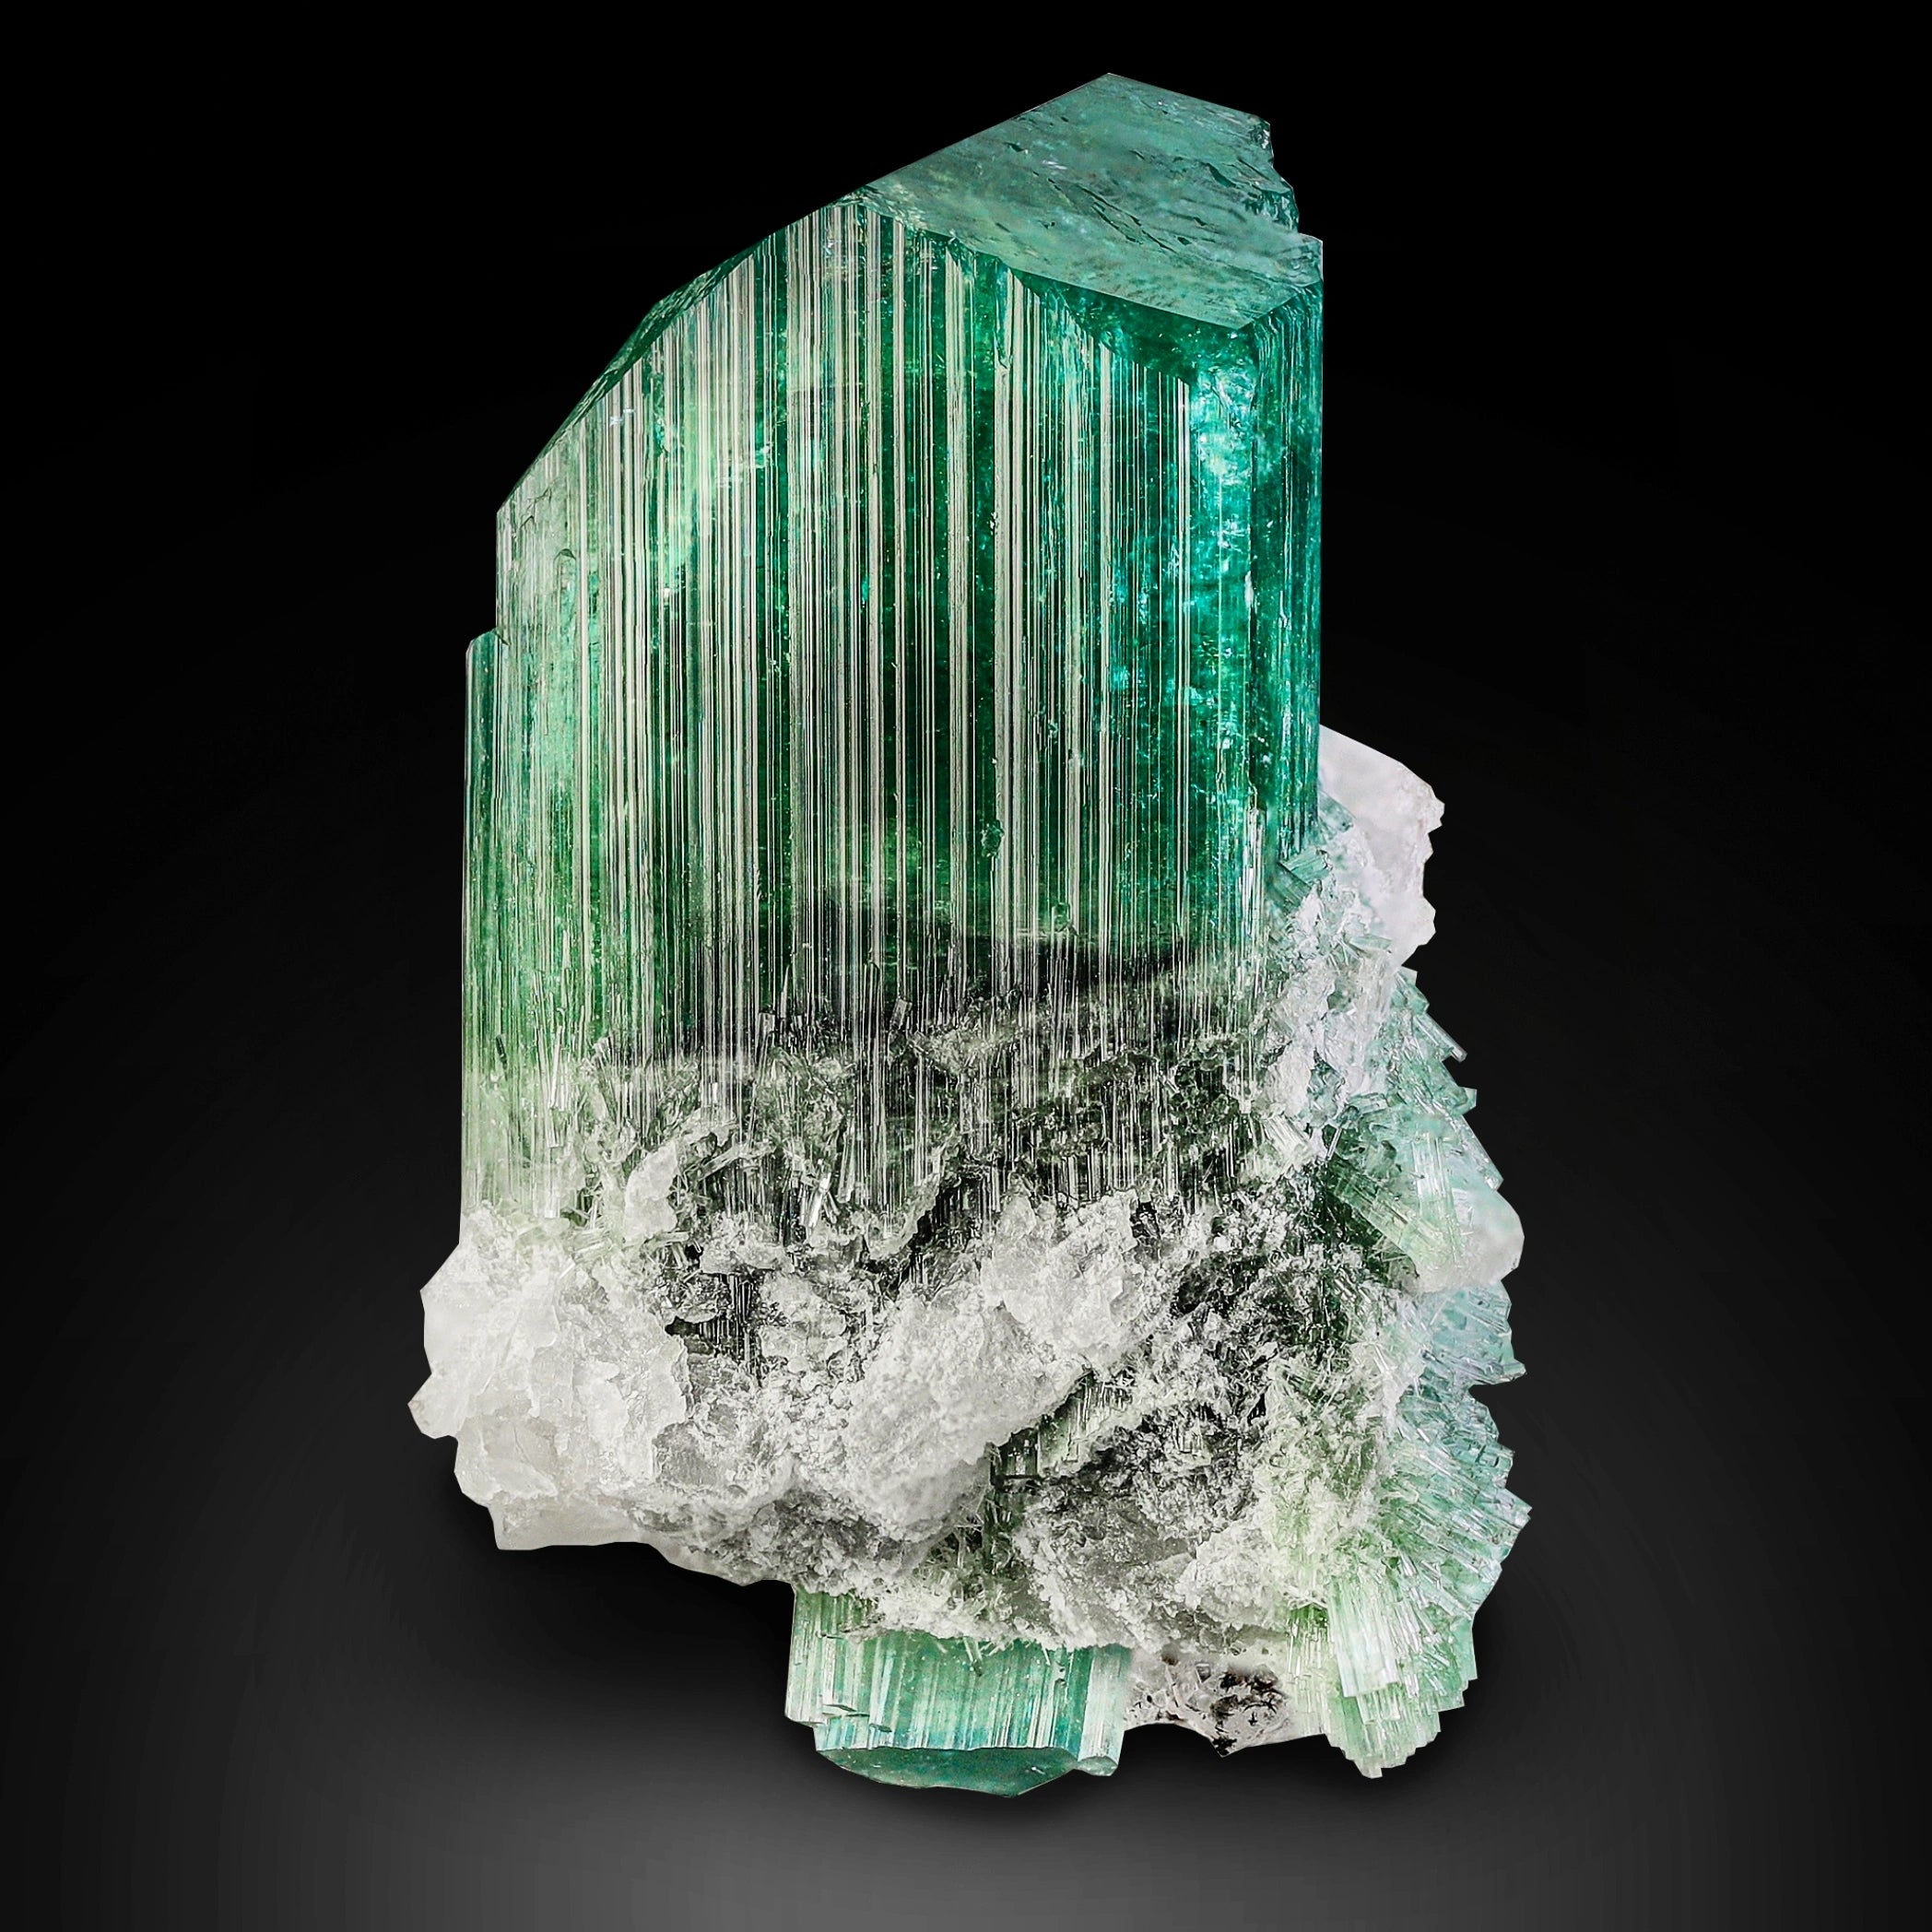 Celestial "New Find" Emerald Green Tourmaline Crystal with White Albite Matrix from Pakistan